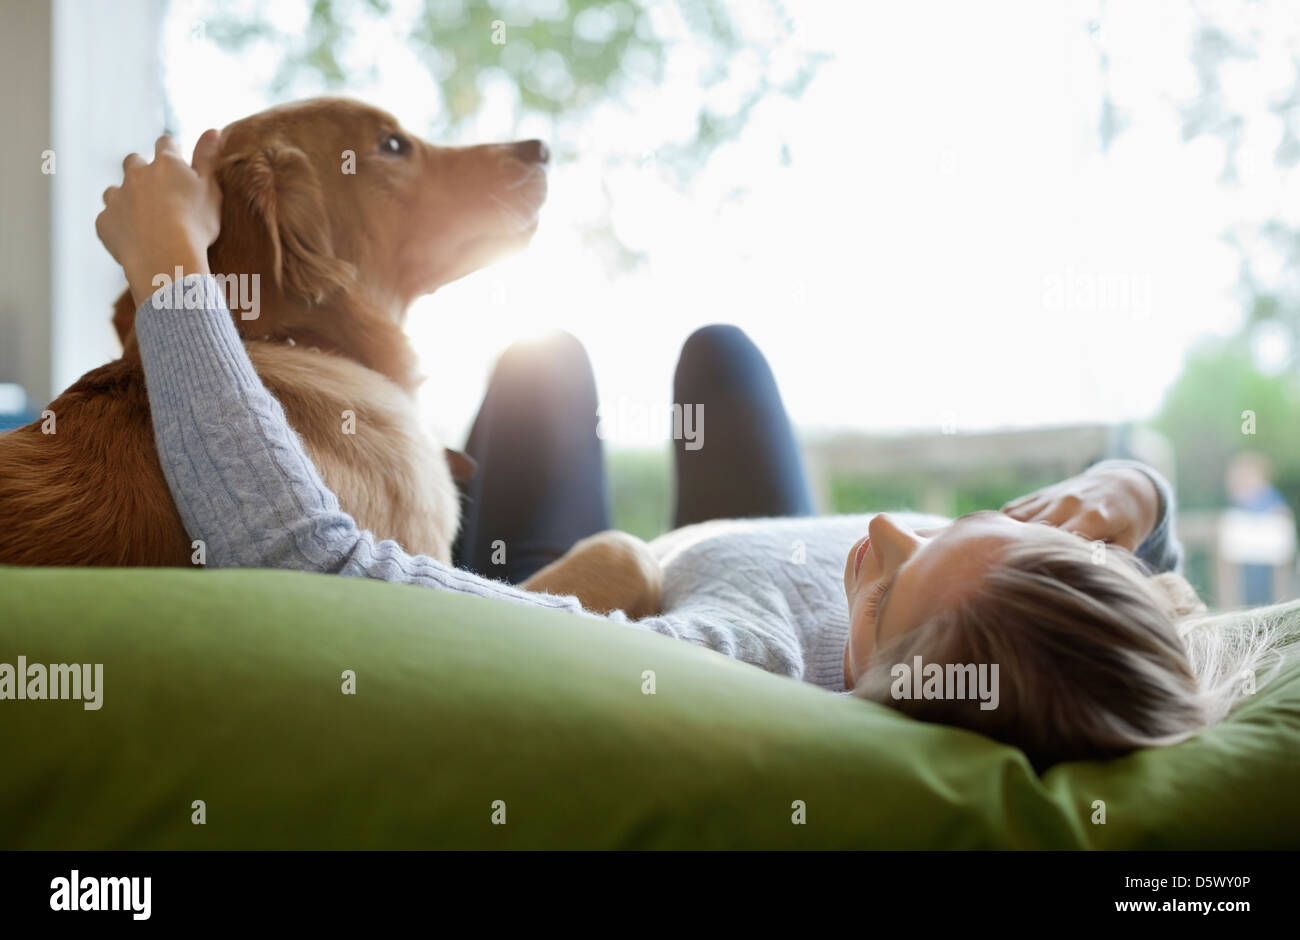 Woman petting dog on bed Stock Photo